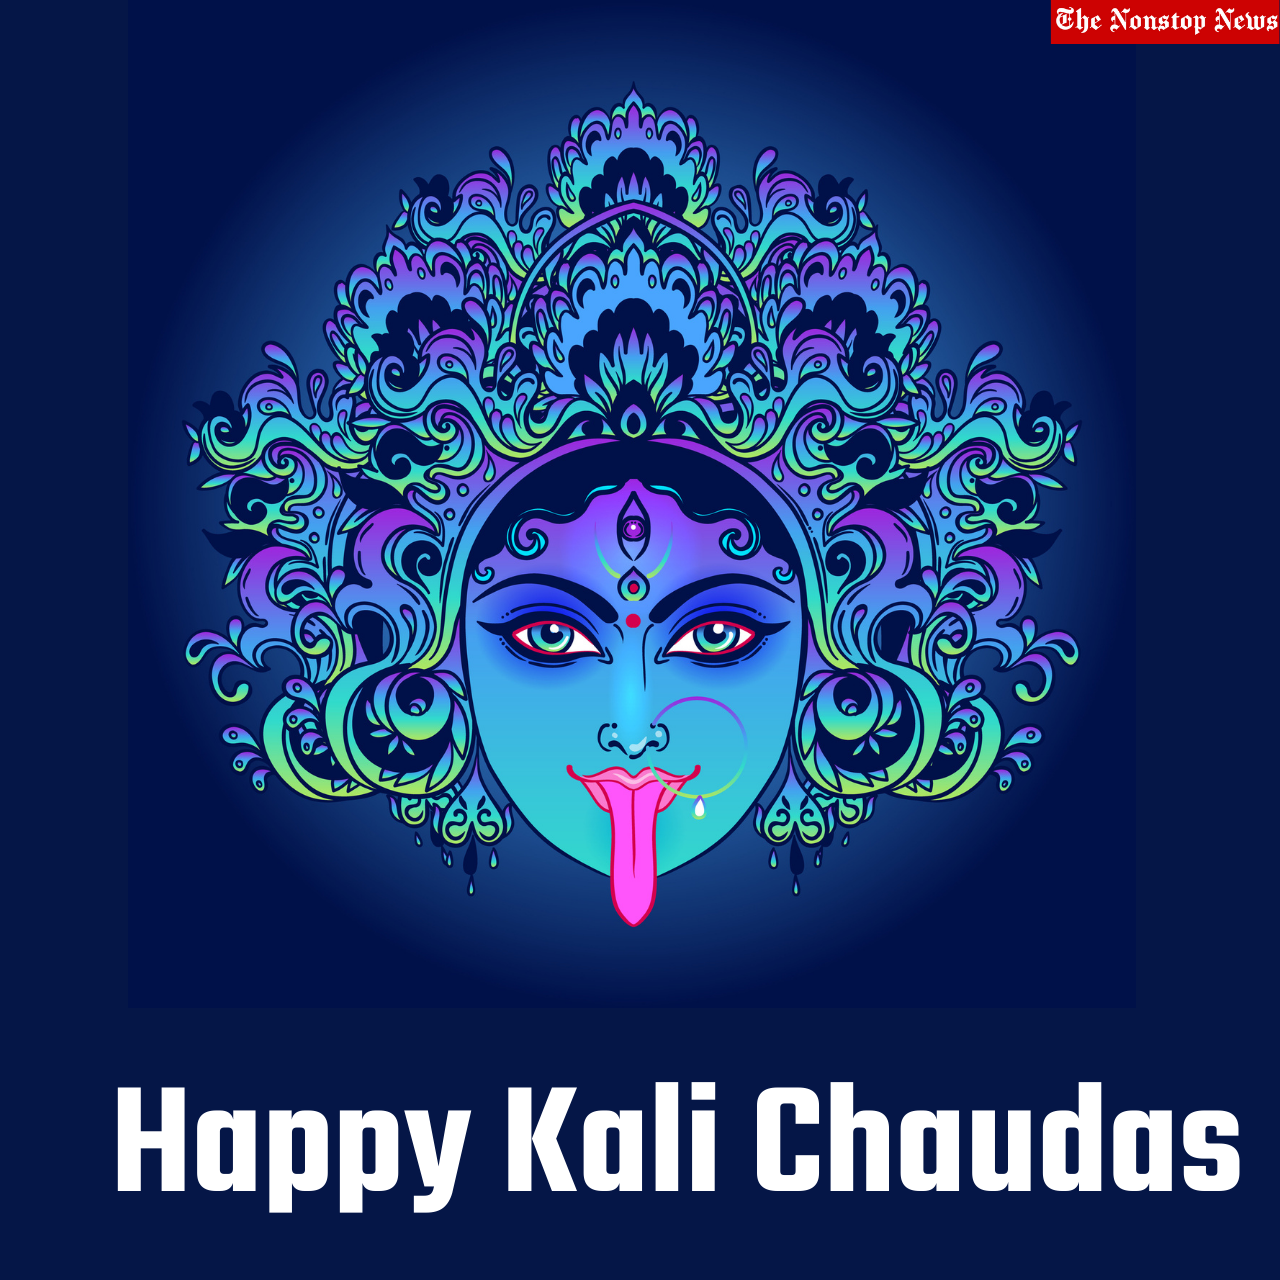 Kali Chaudas 2021 Wishes, Quotes, Messages, HD Images, Greetings, and Status to share with your Loved Ones